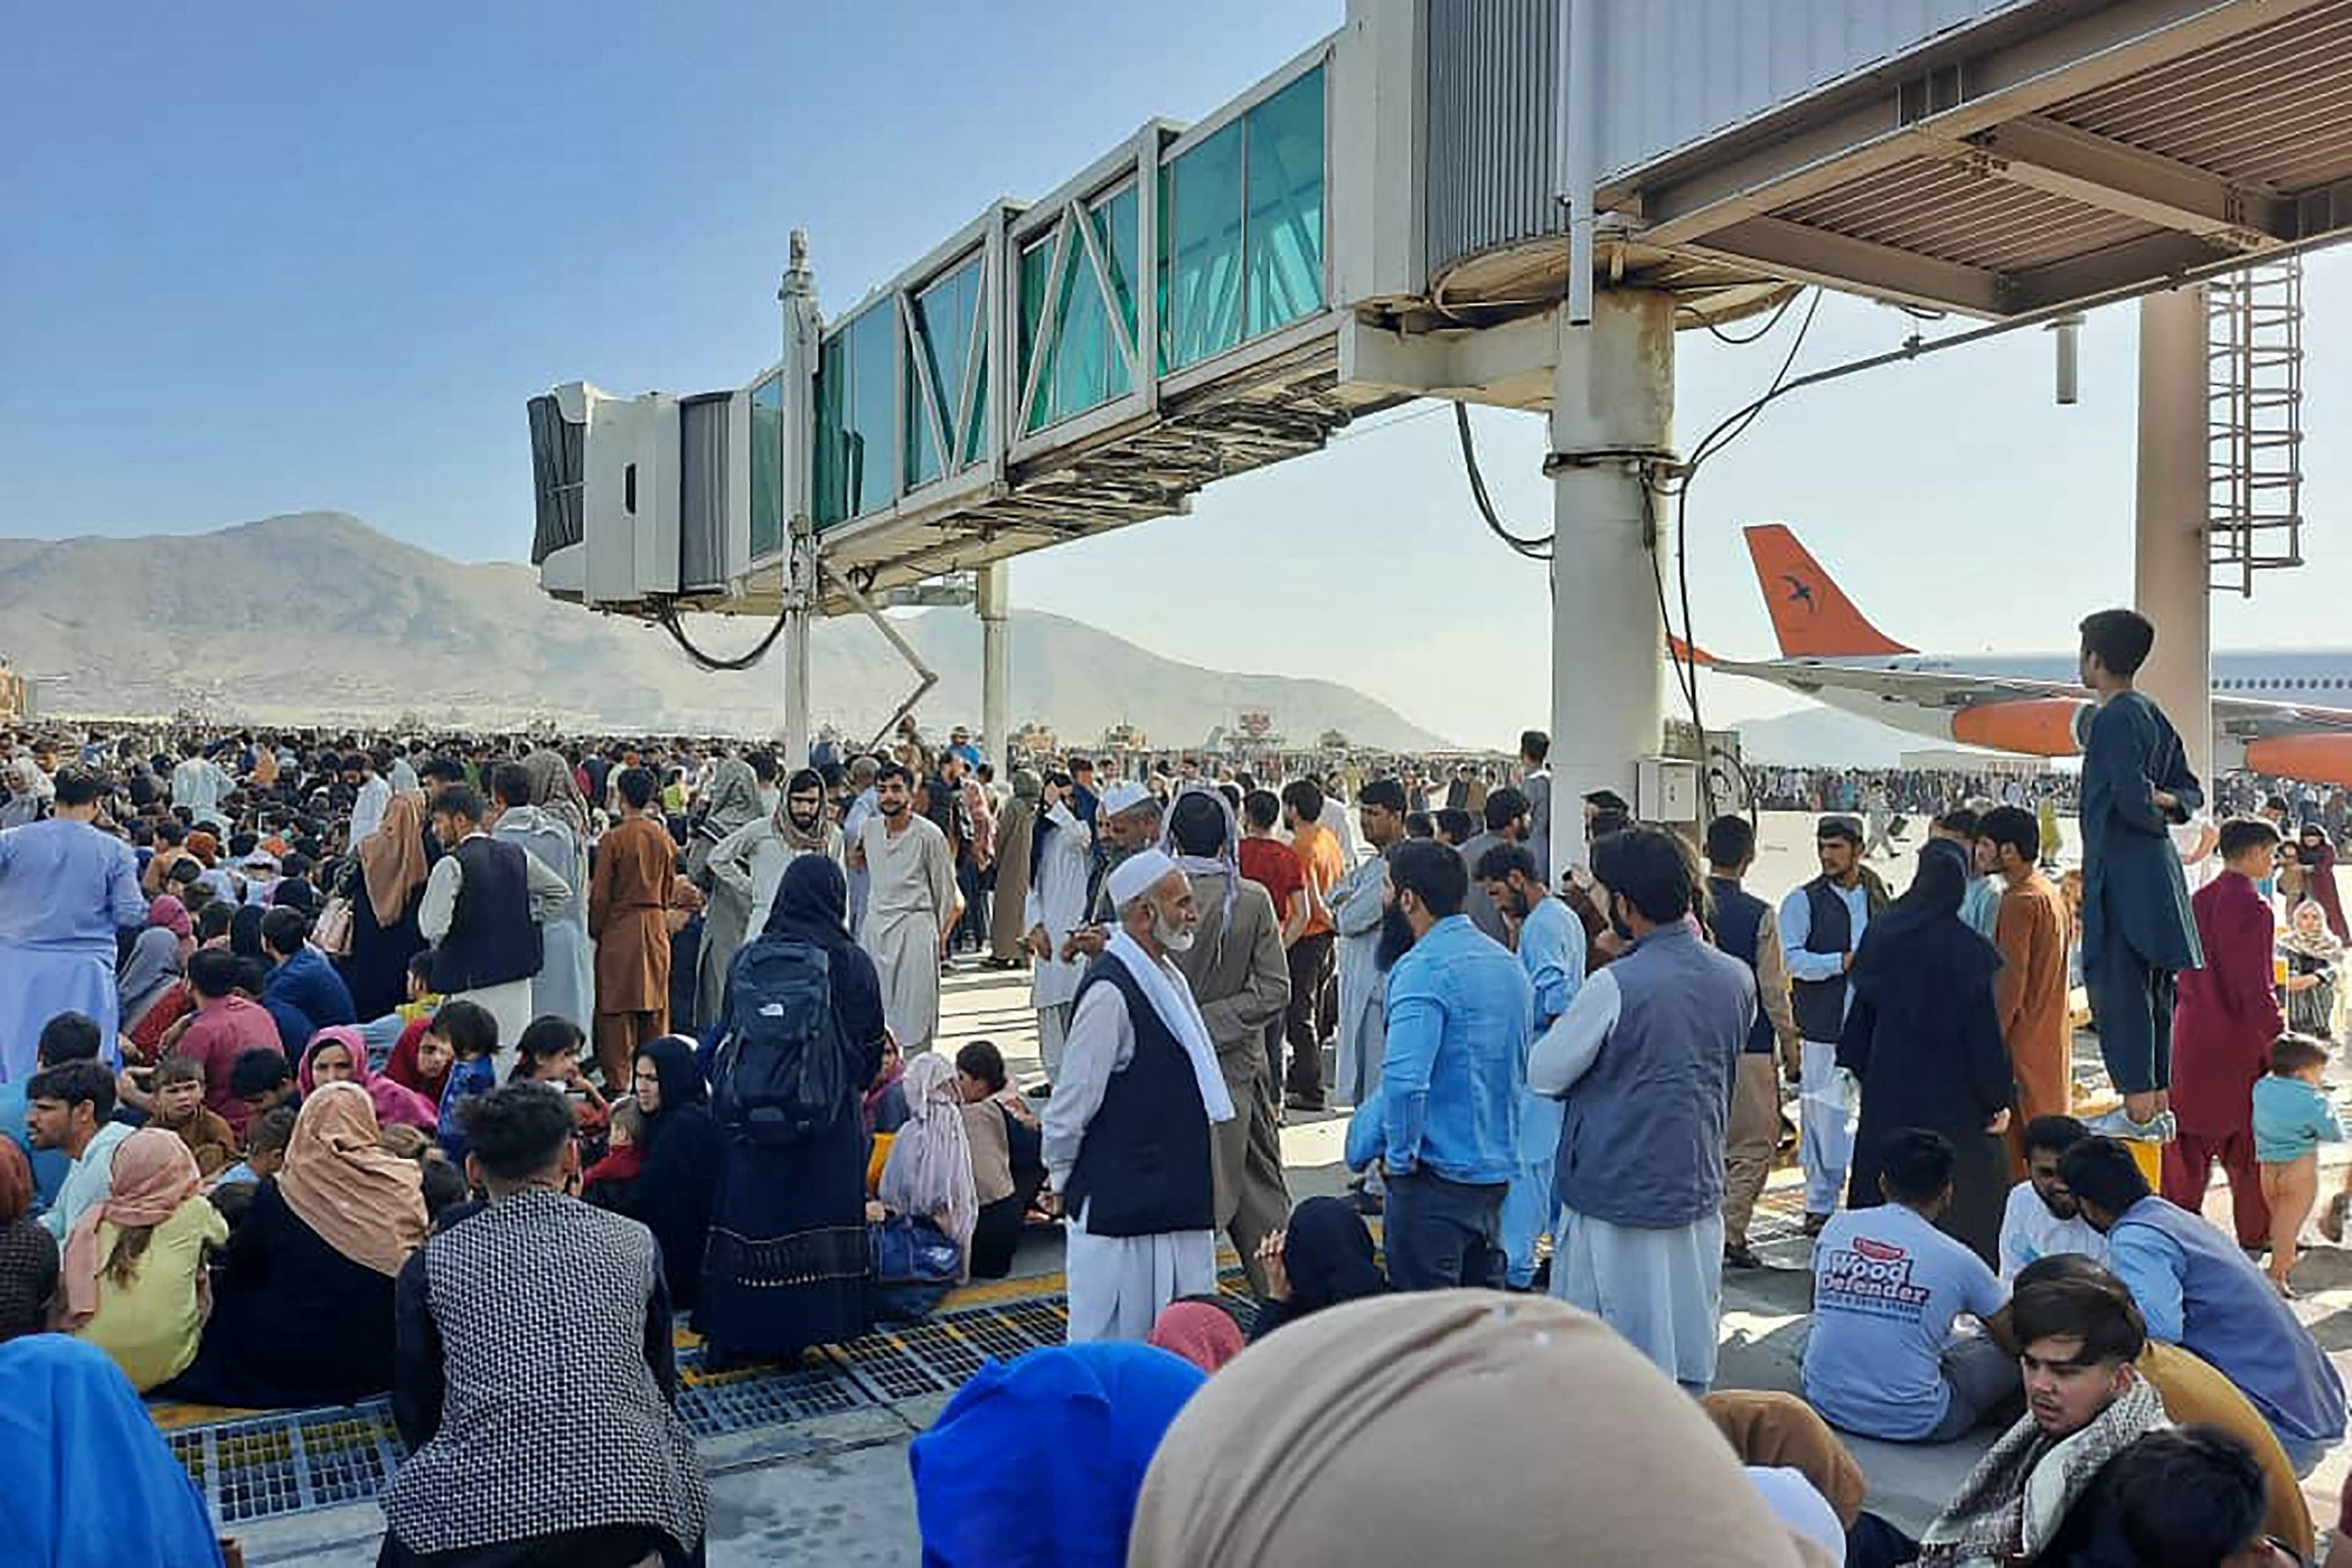 Afghans crowd at the tarmac of the Kabul airport to flee the country after President Ashraf Ghani fled the country and conceded power to the Taliban, Afghanistan, Aug. 16, 2021. (AFP Photo)